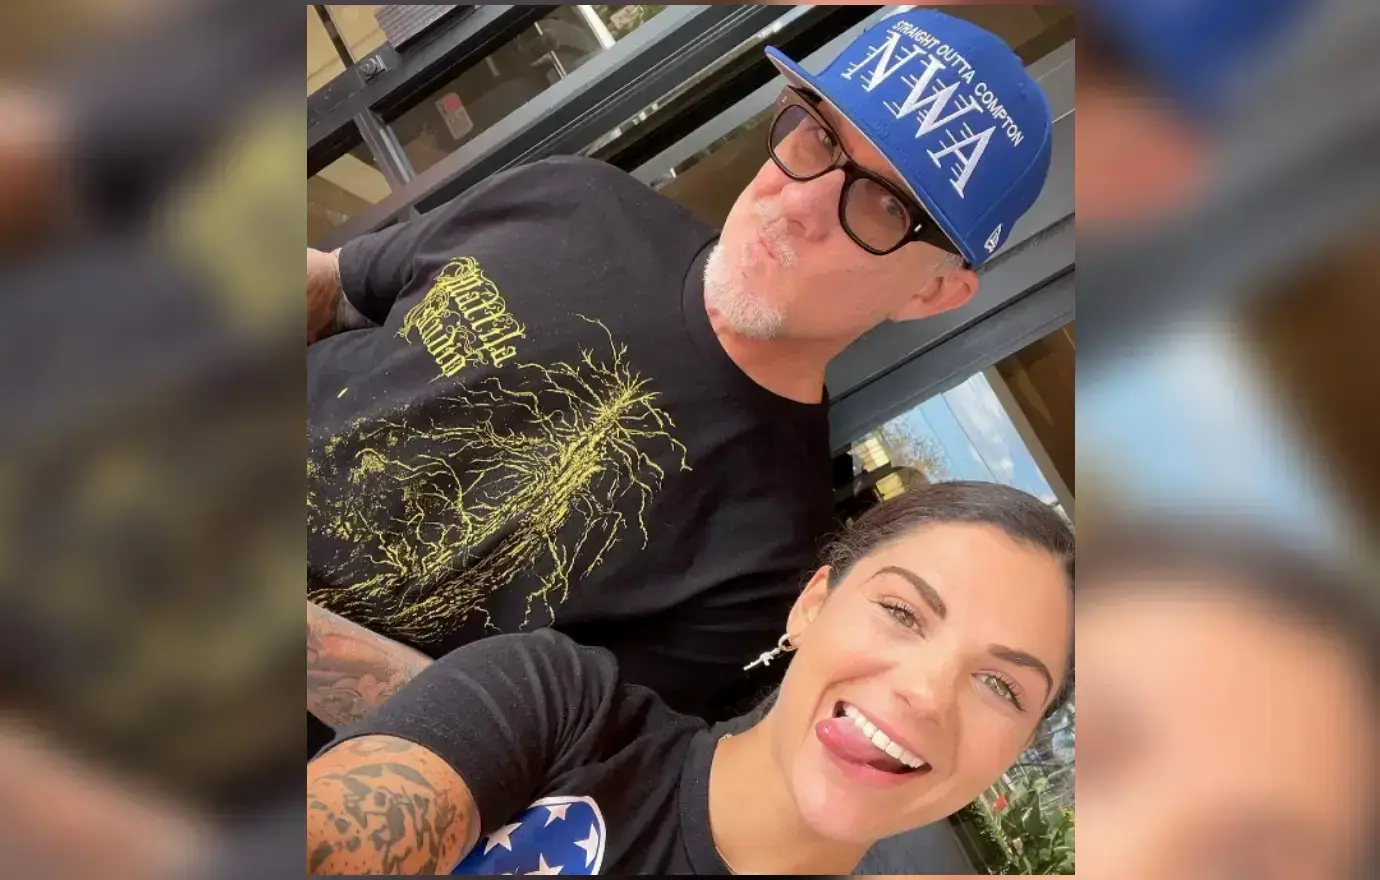 Jesse James and Pregnant Wife Bonnie Rotten Back Together For Christmas Fiesta